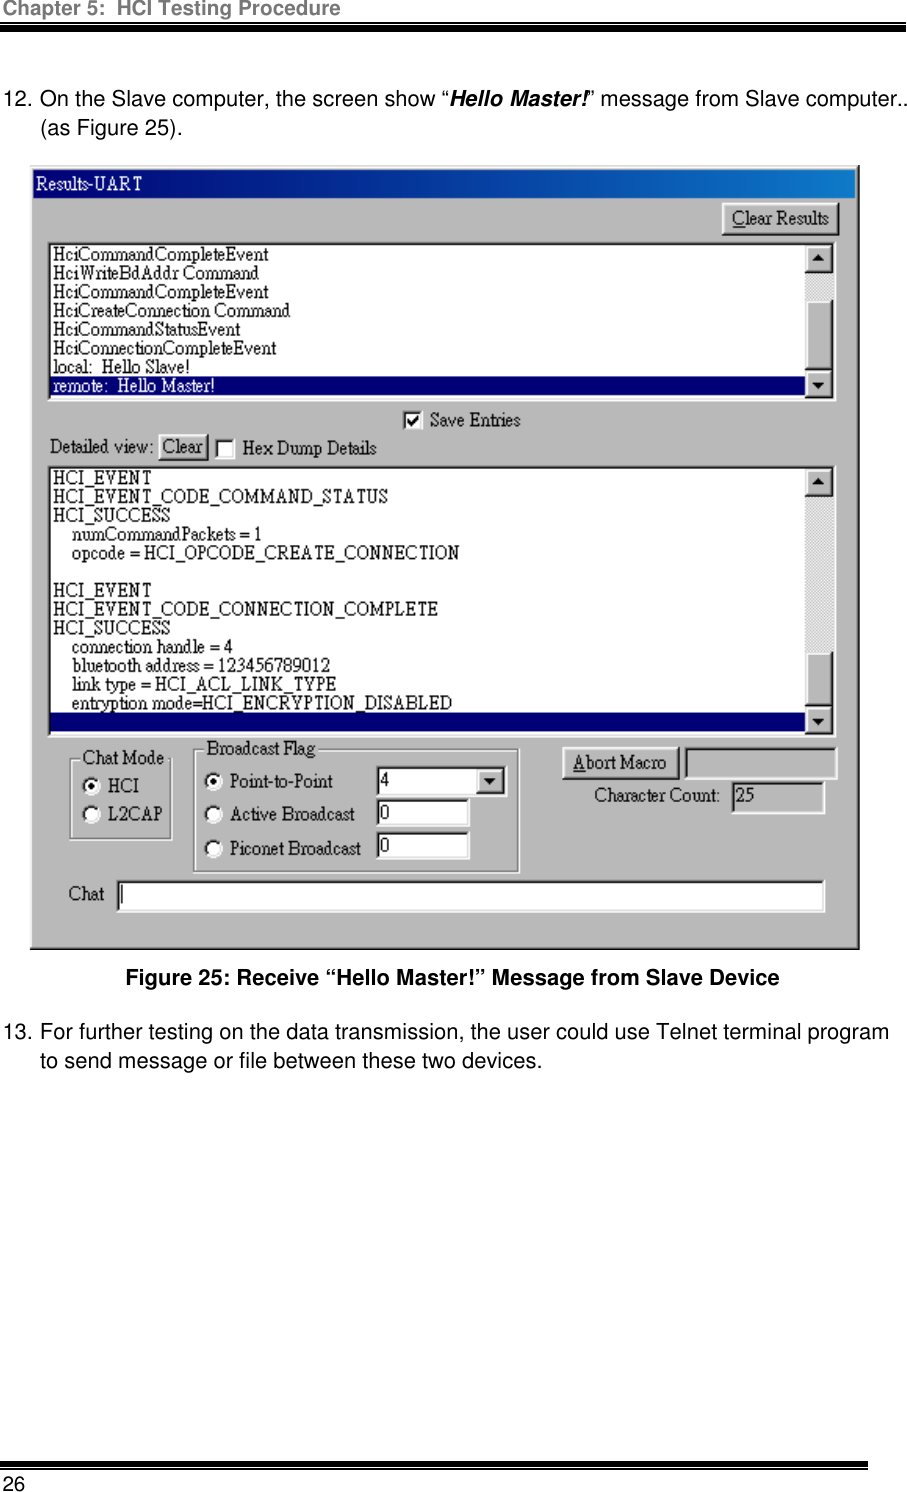 Chapter 5:  HCI Testing Procedure  26  12. On the Slave computer, the screen show “Hello Master!” message from Slave computer.. (as Figure 25). Figure 25: Receive “Hello Master!” Message from Slave Device 13. For further testing on the data transmission, the user could use Telnet terminal program to send message or file between these two devices.       